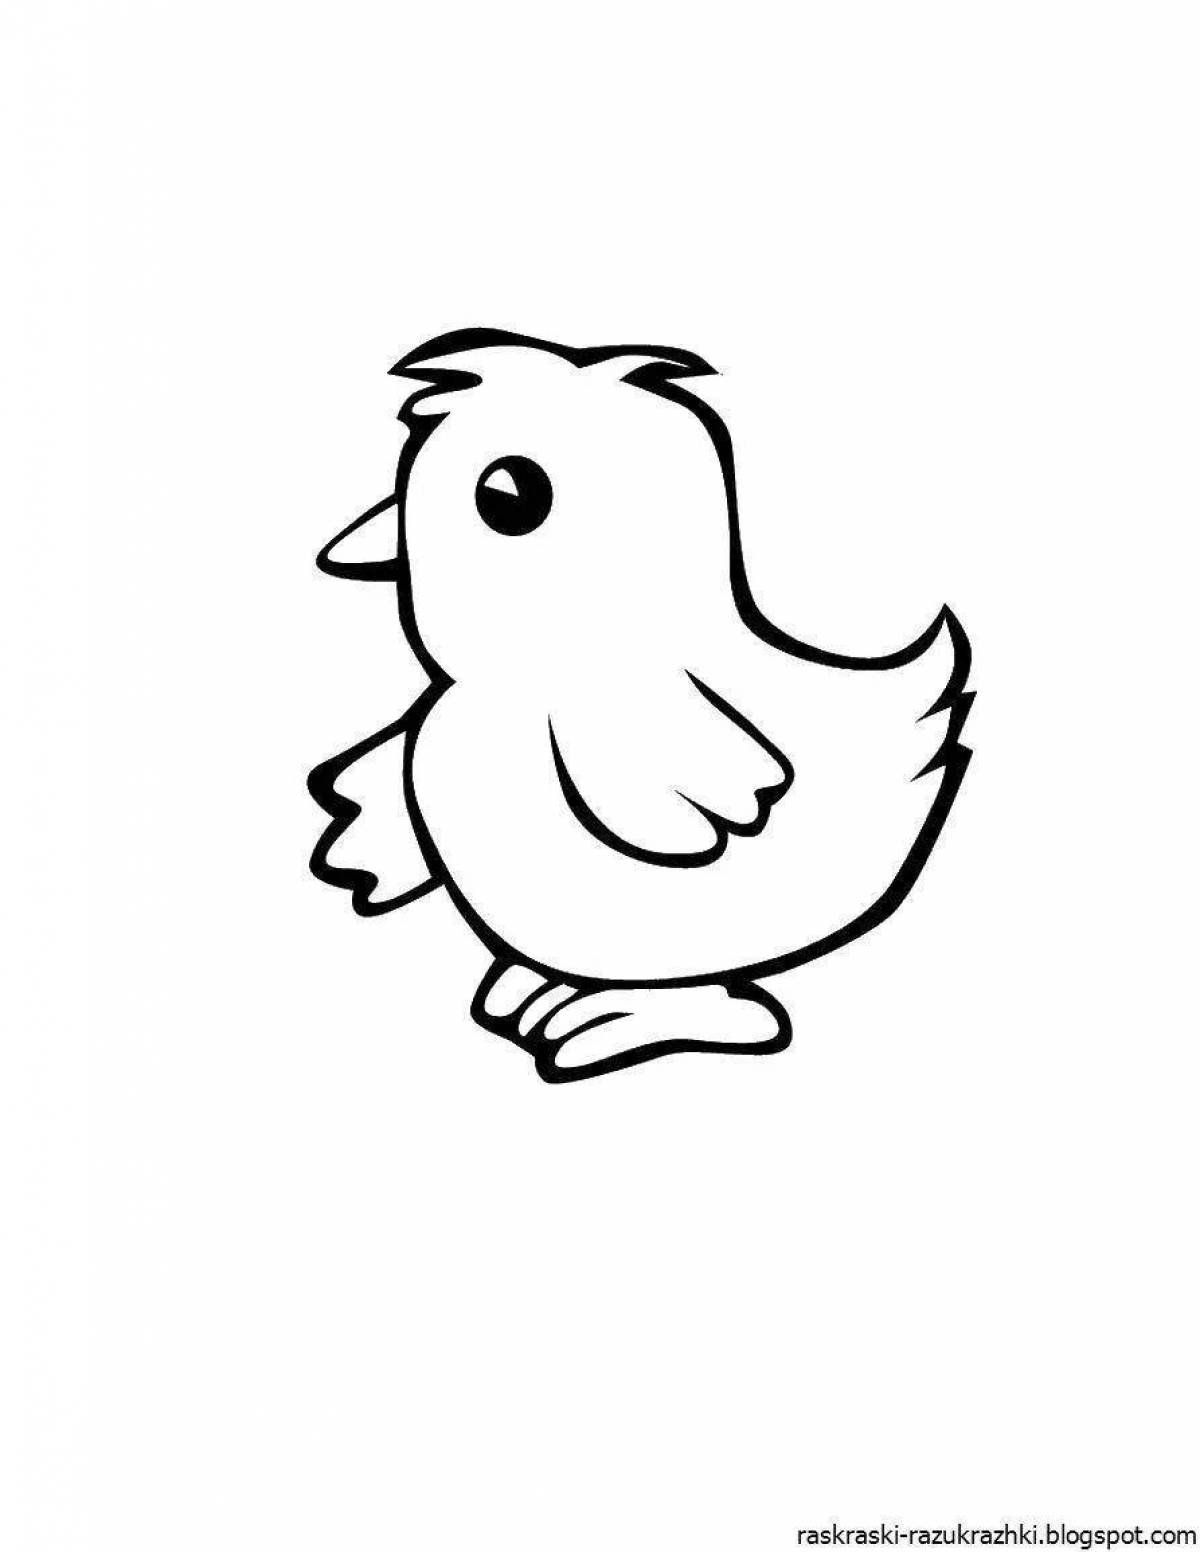 Cute chick coloring page for kids